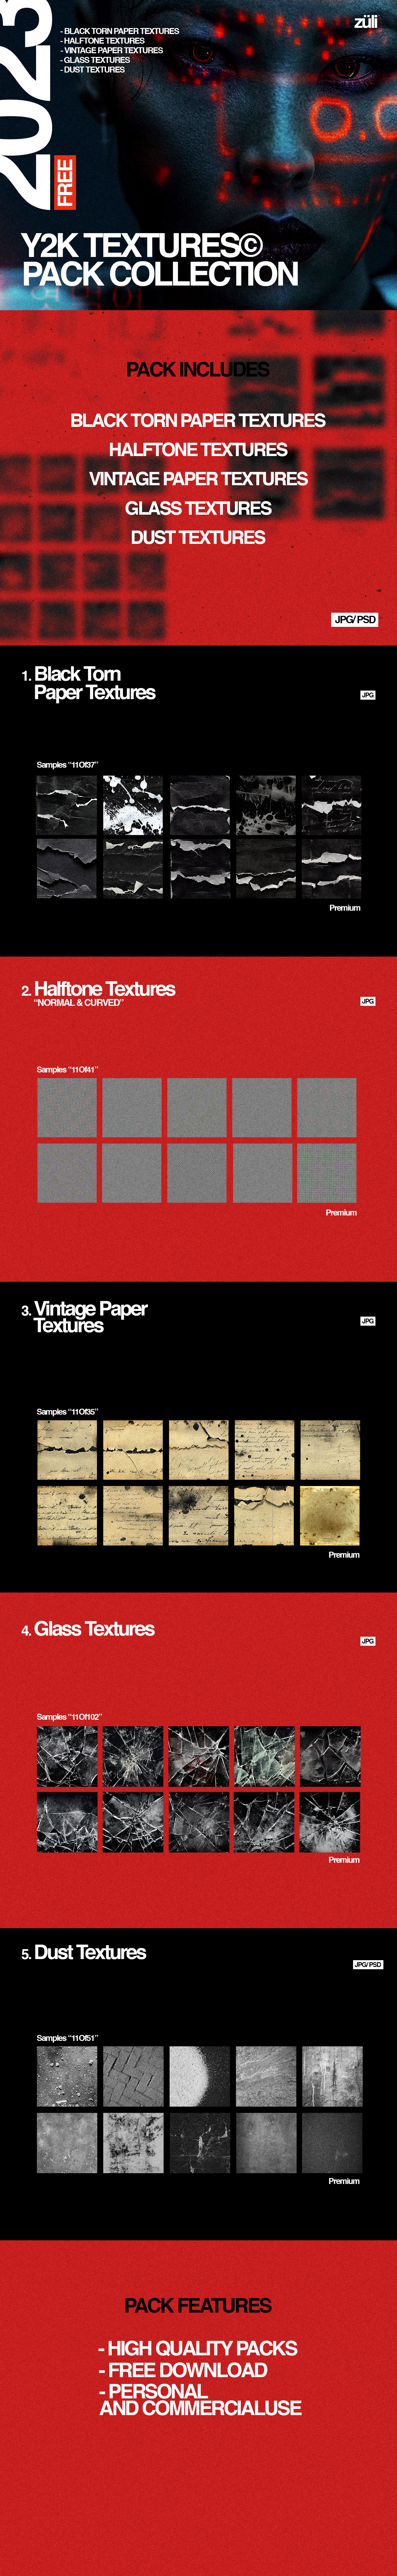 free textures png textures pack textures Y2K free download free Pack halftone grunge